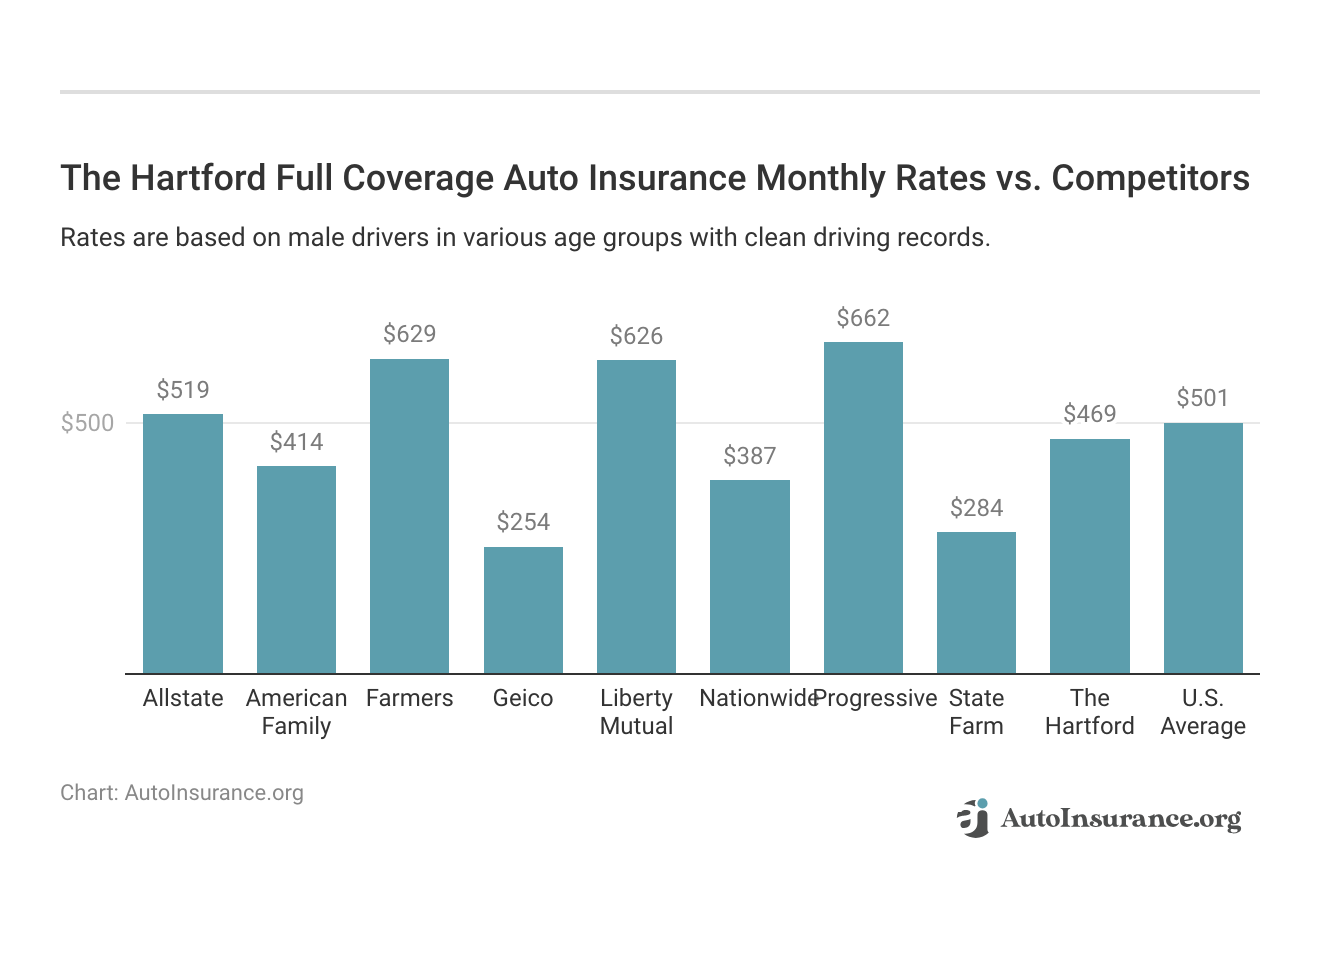 <h3>The Hartford Full Coverage Auto Insurance Monthly Rates vs. Competitors</h3>